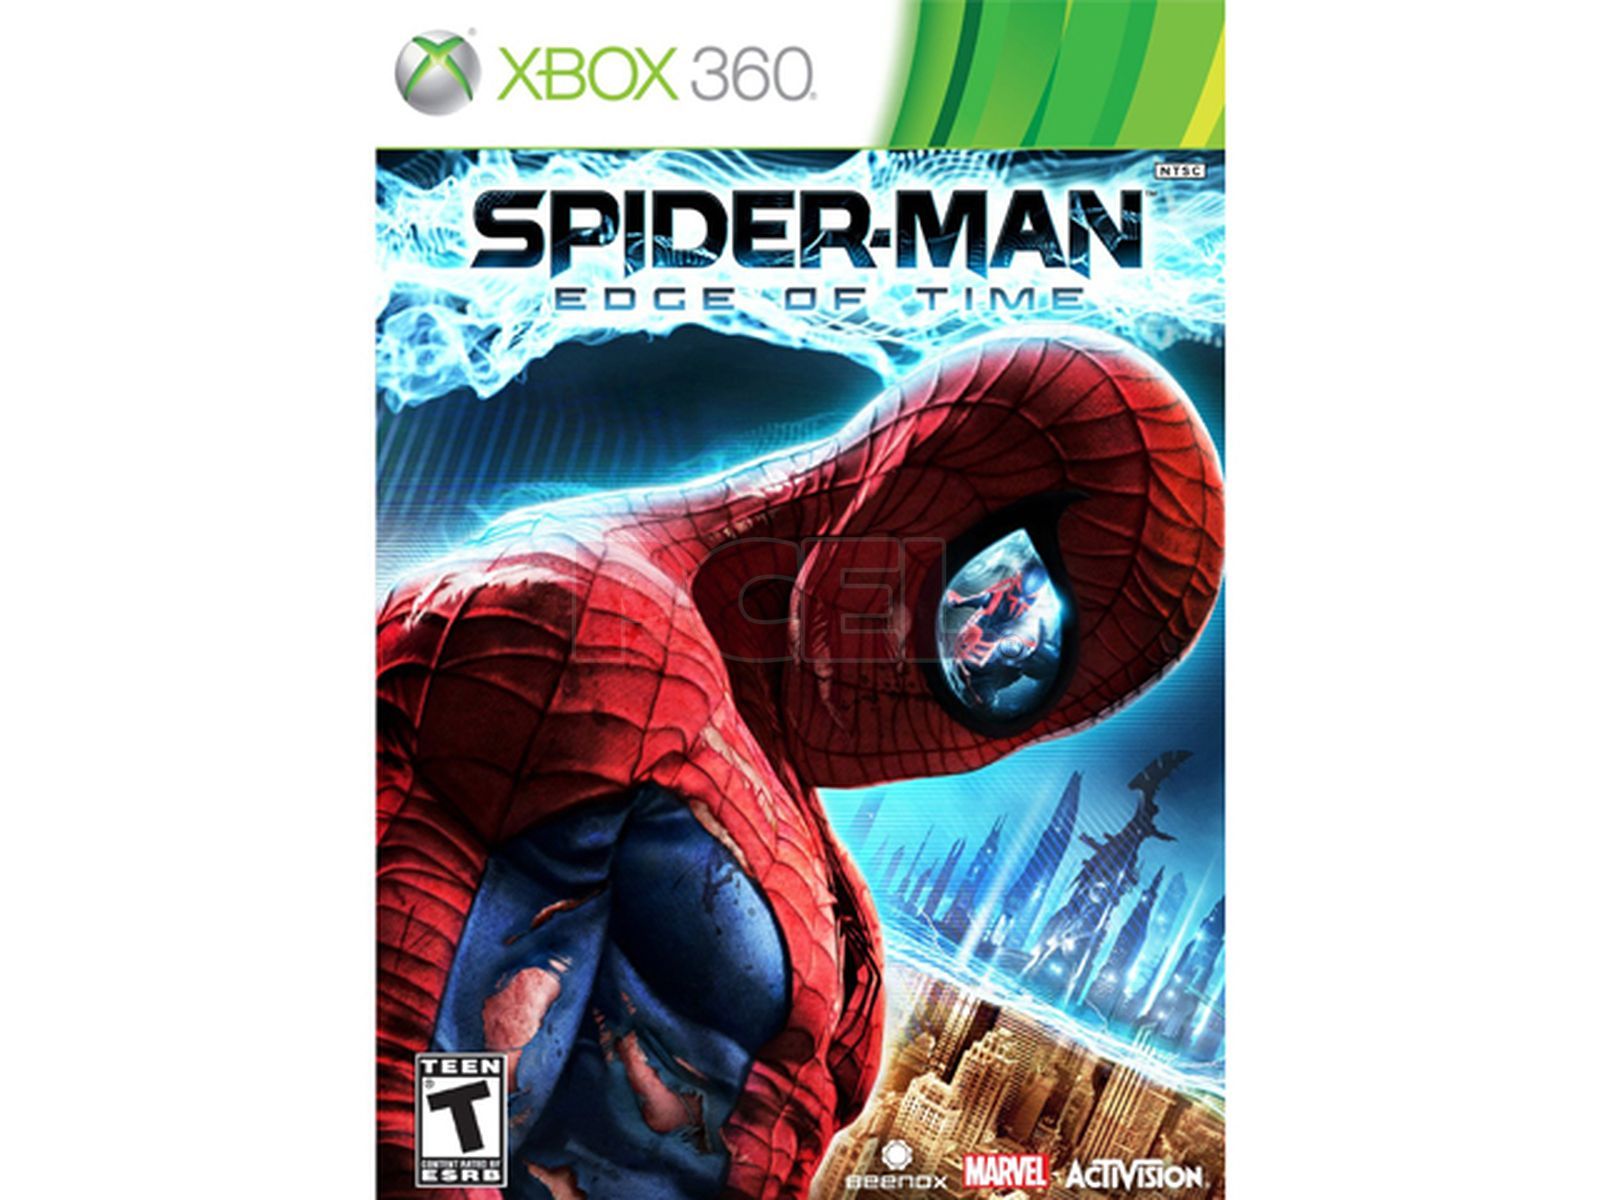 Spider-man: The Edge of Time (Xbox 360)